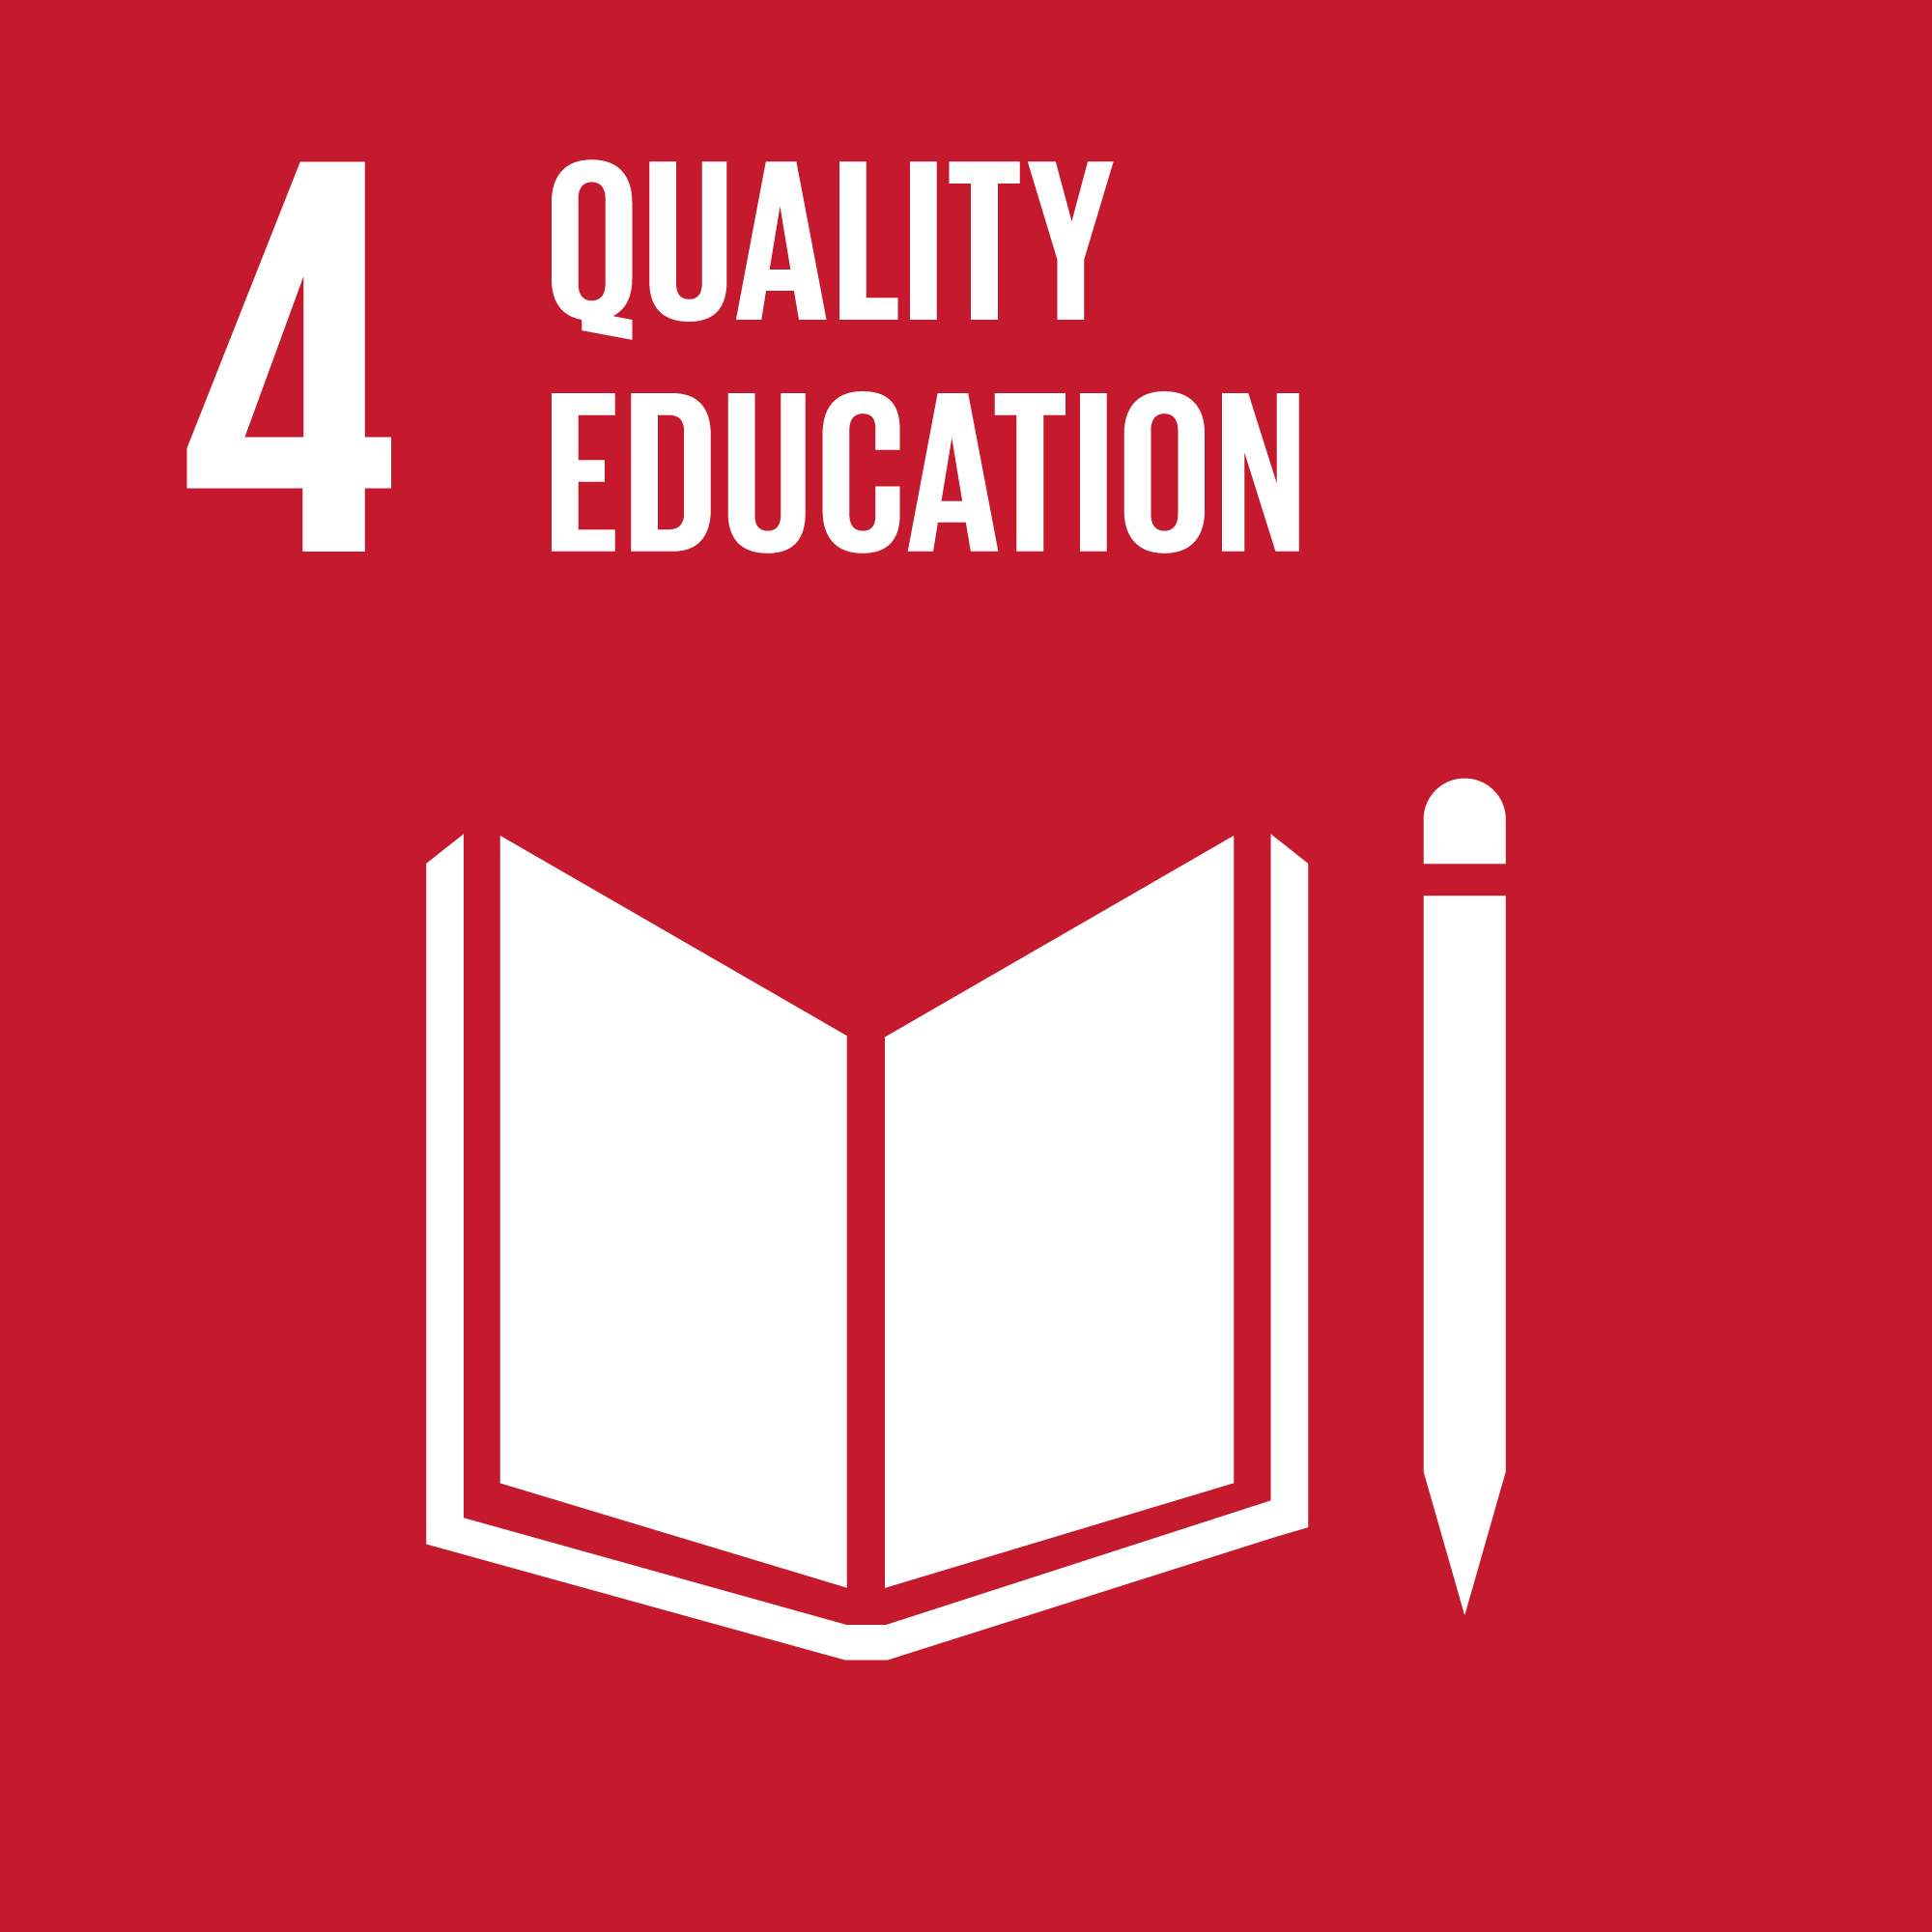 UN Sustainable goal - Quality Education